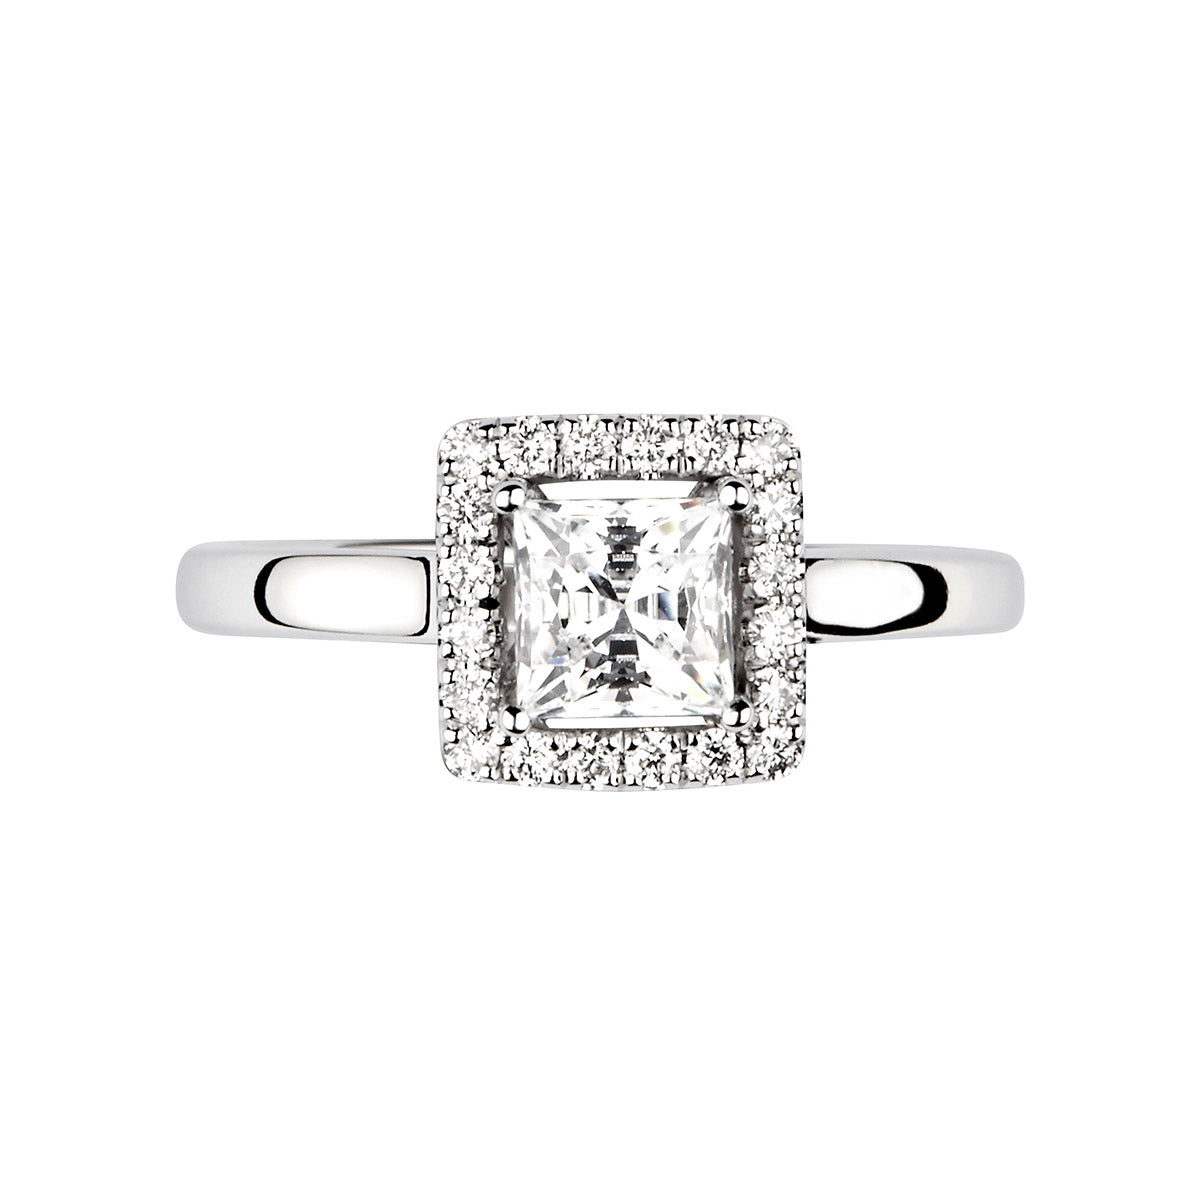 Princess square cut diamond set into a classic 4 claw setting surrounded with a diamond halo ring